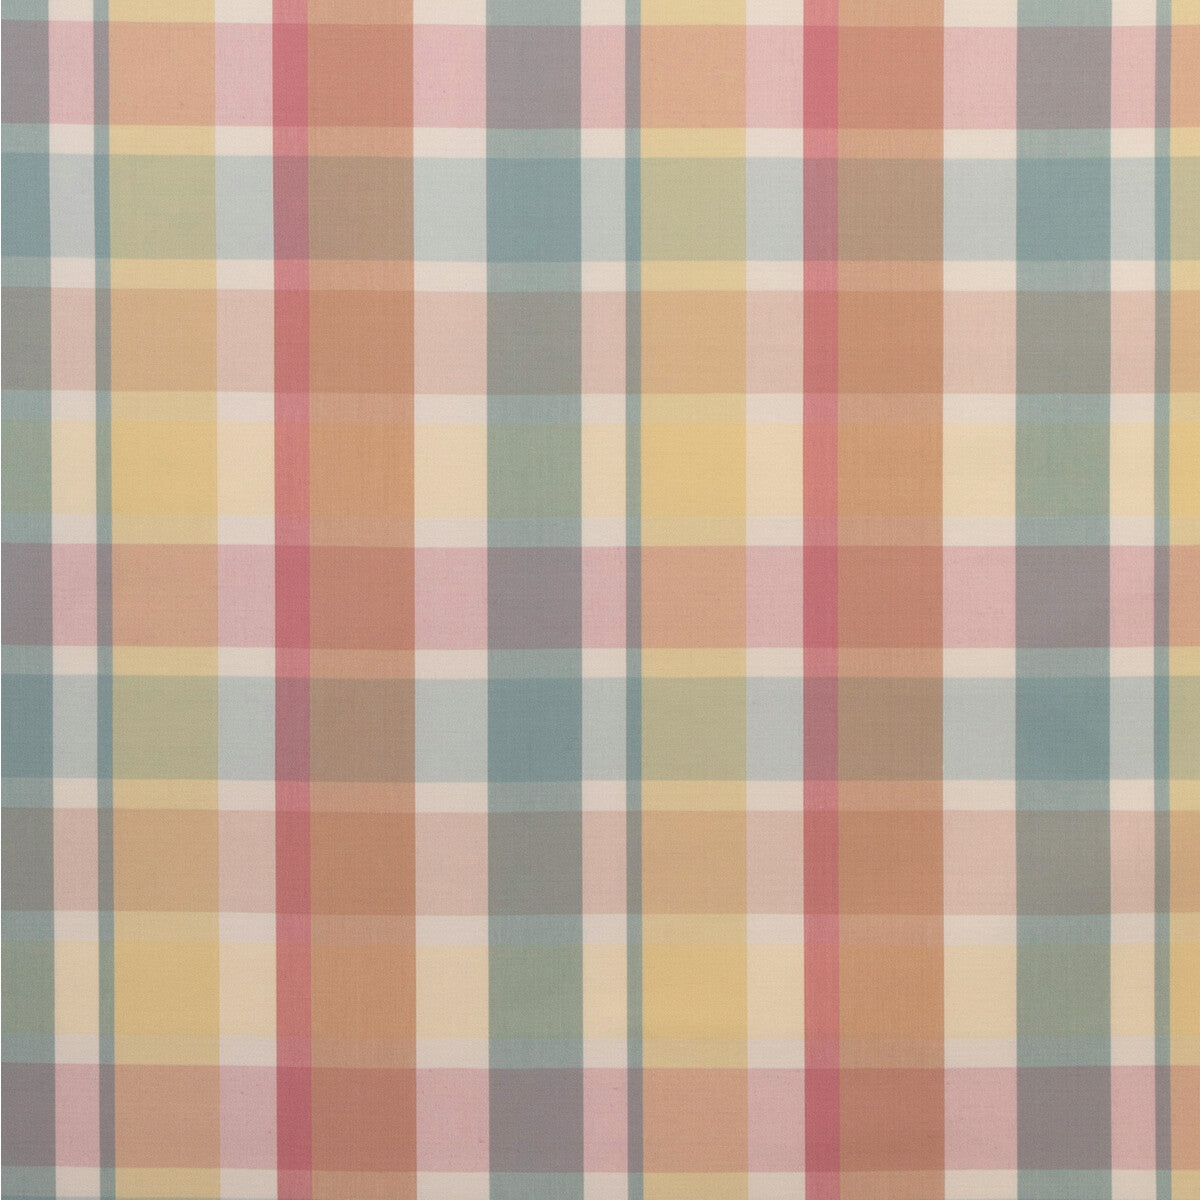 Fisher Plaid fabric in melon/aqua color - pattern 2023107.3524.0 - by Lee Jofa in the Highfield Stripes And Plaids collection